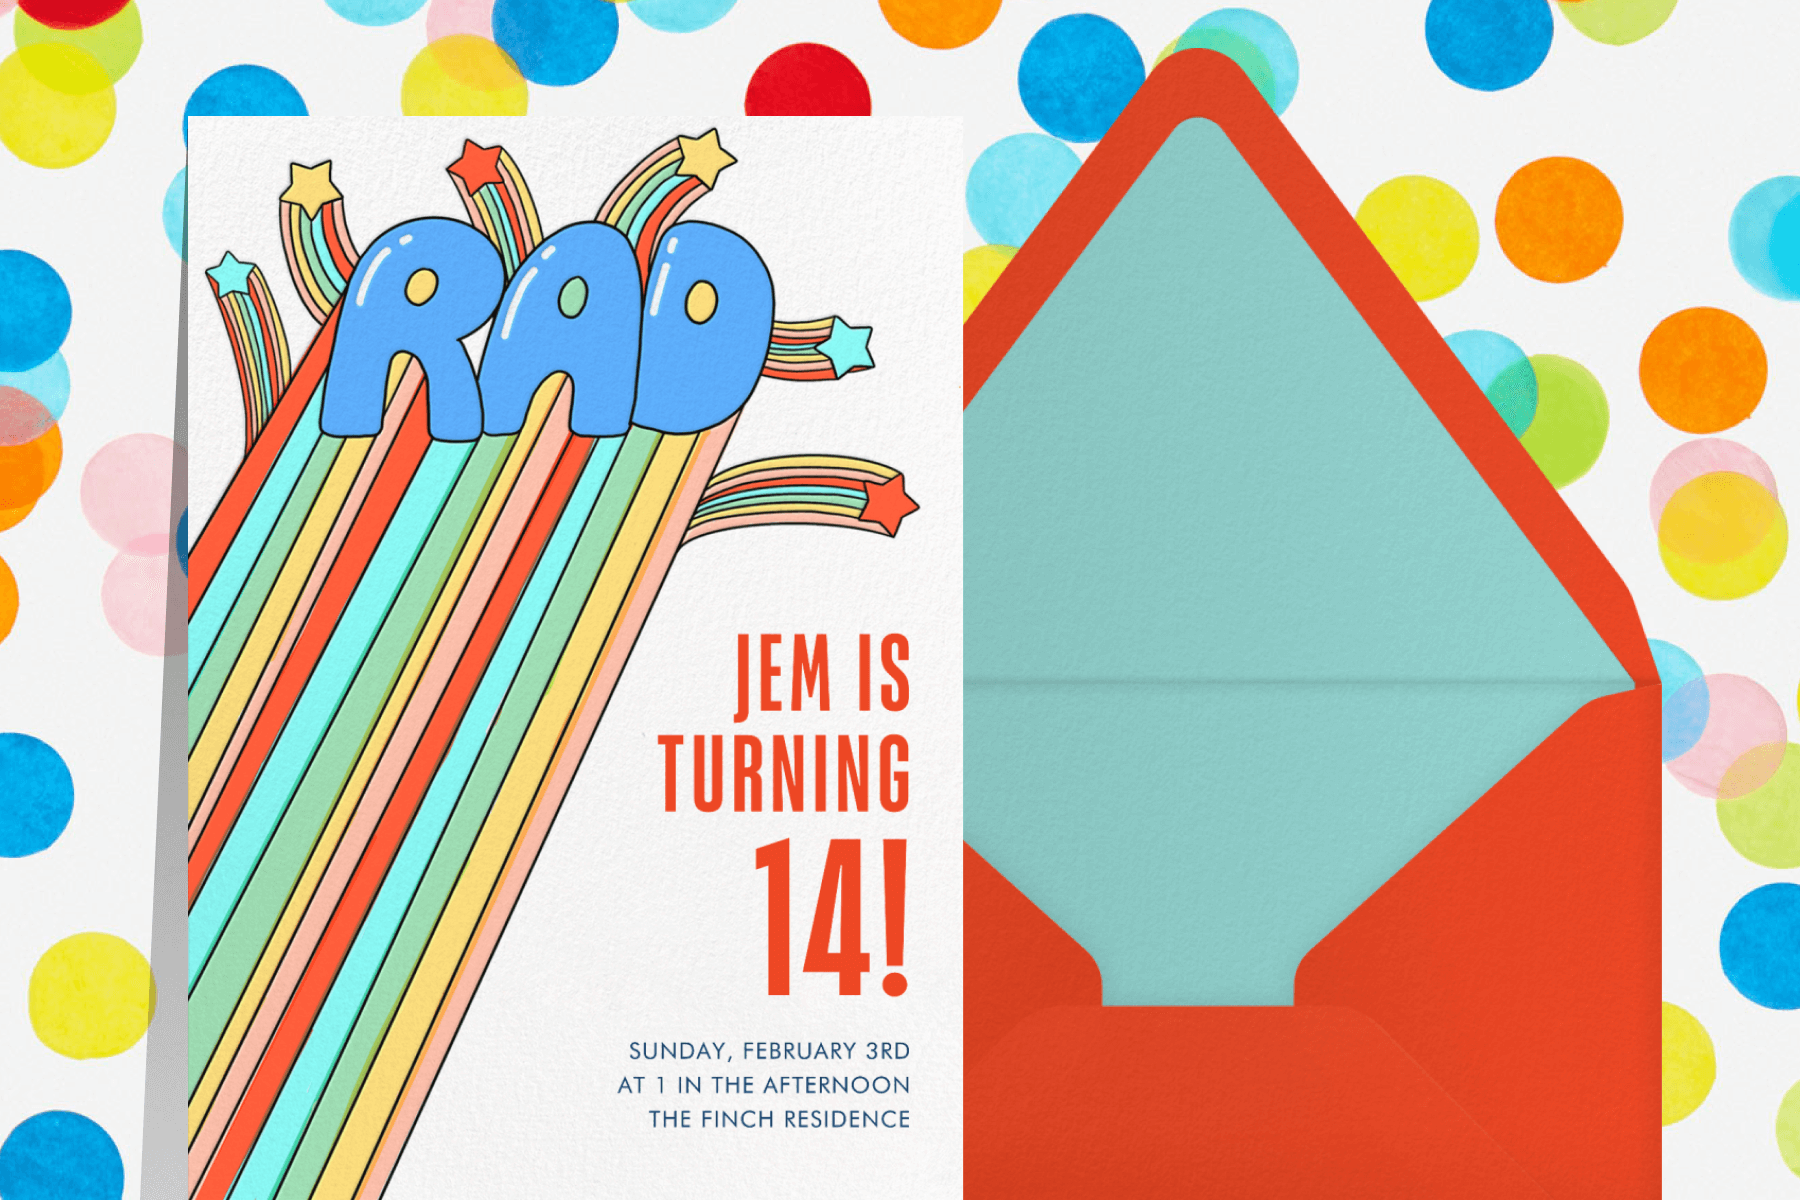 A birthday invitation with the word “Rad” in blue bubble letters with a trail of rainbows sits next to a red envelope on a backdrop of colorful polka dots.